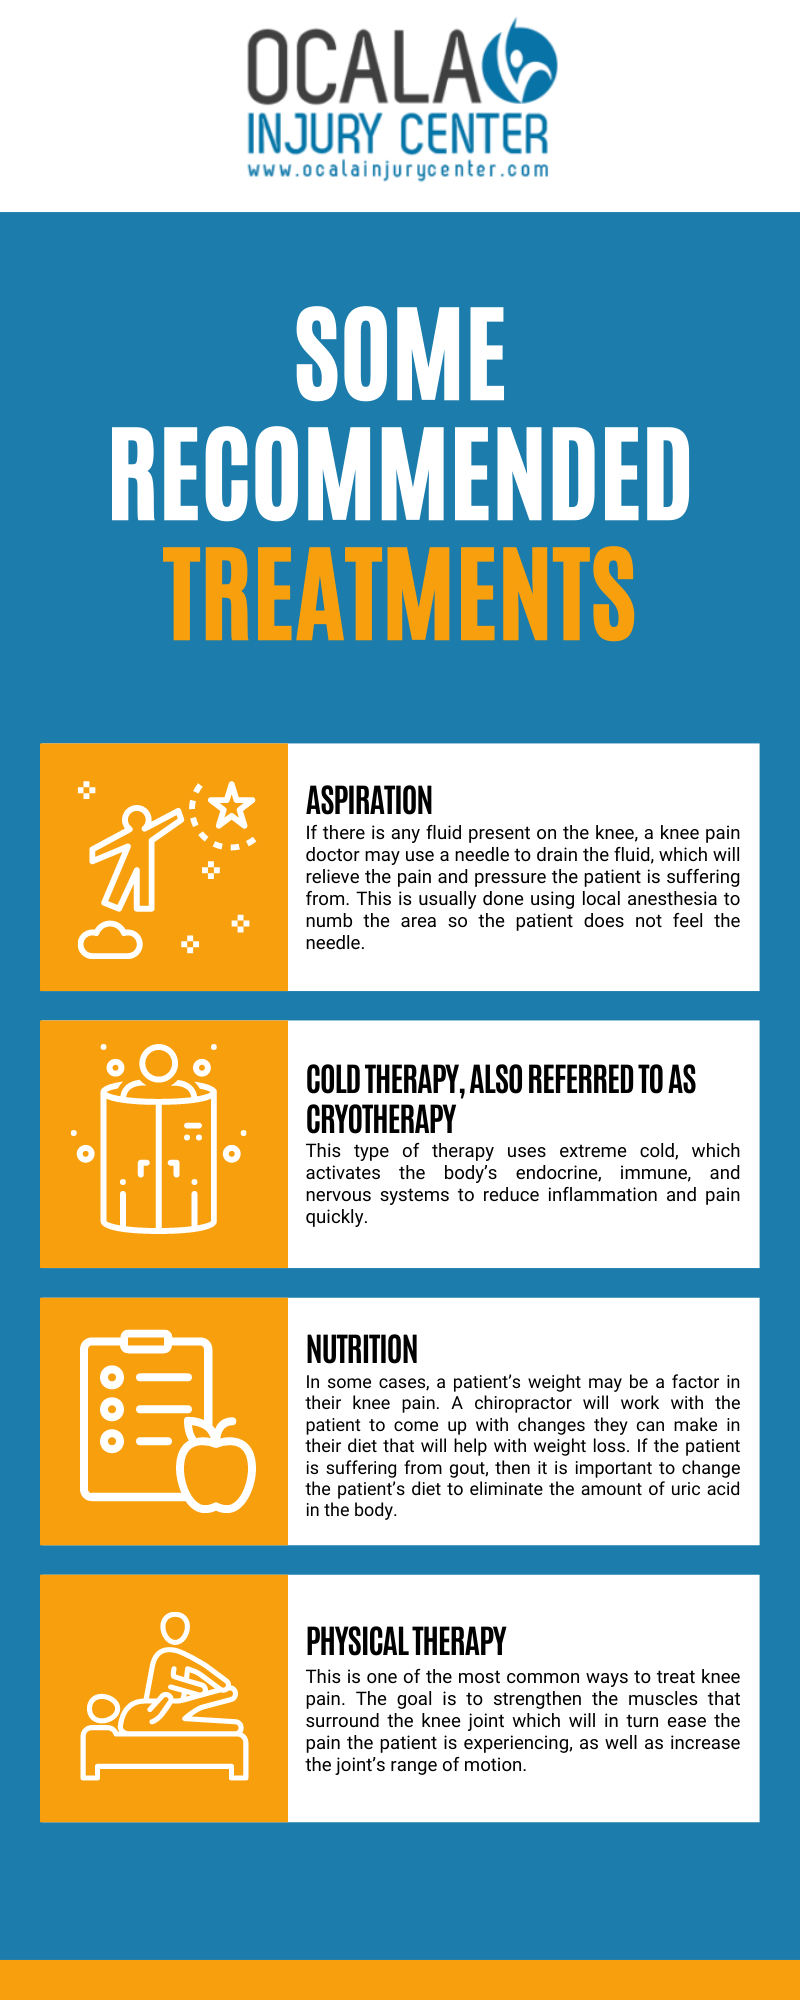 SOME RECOMMENDED TREATMENTS INFOGRAPHIC